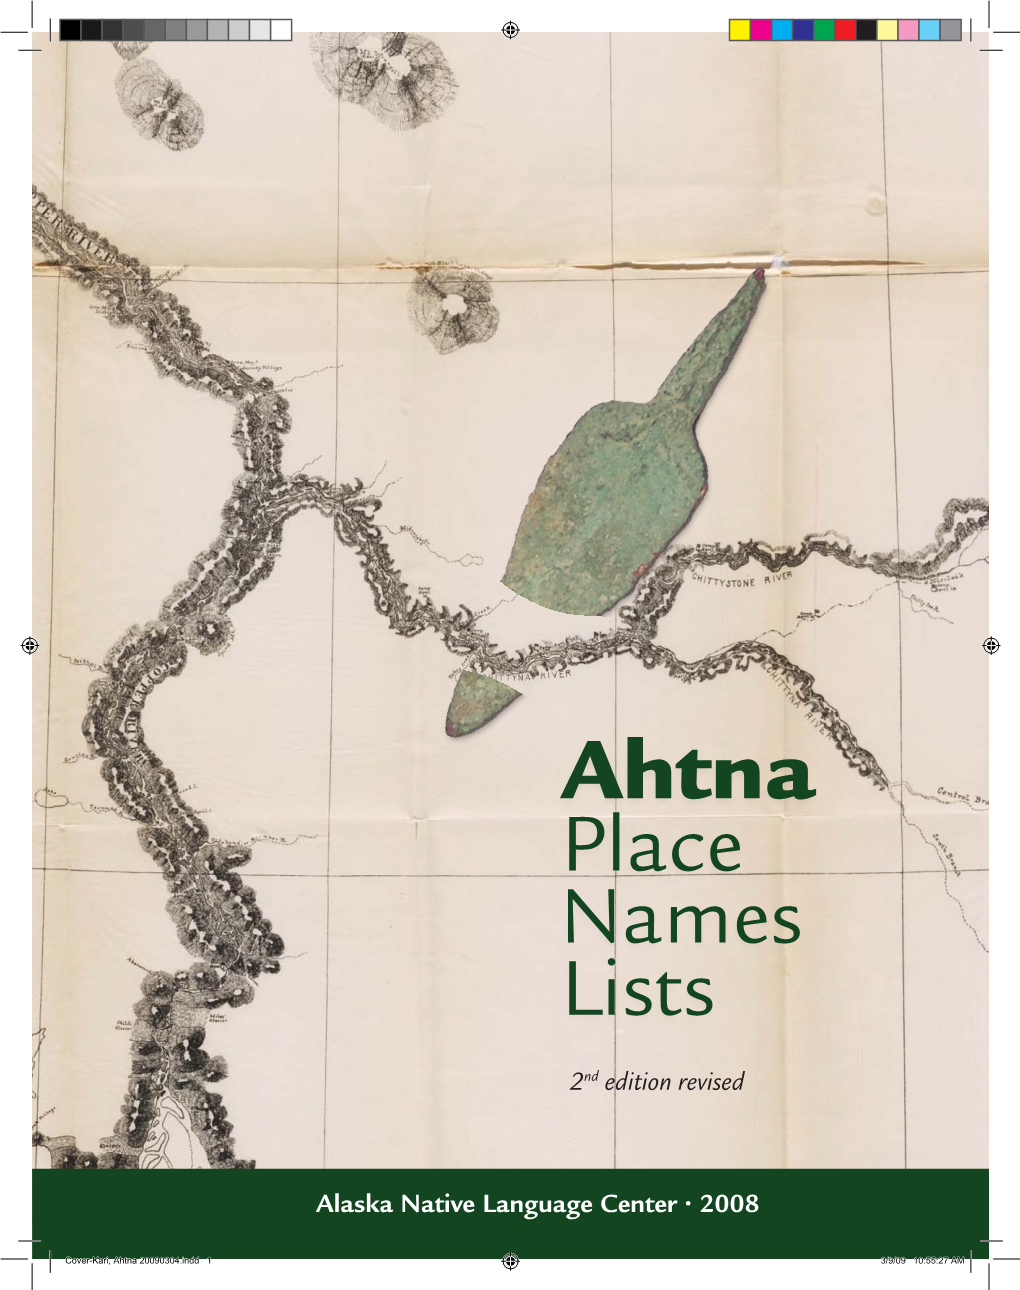 Ahtna Place Names Lists